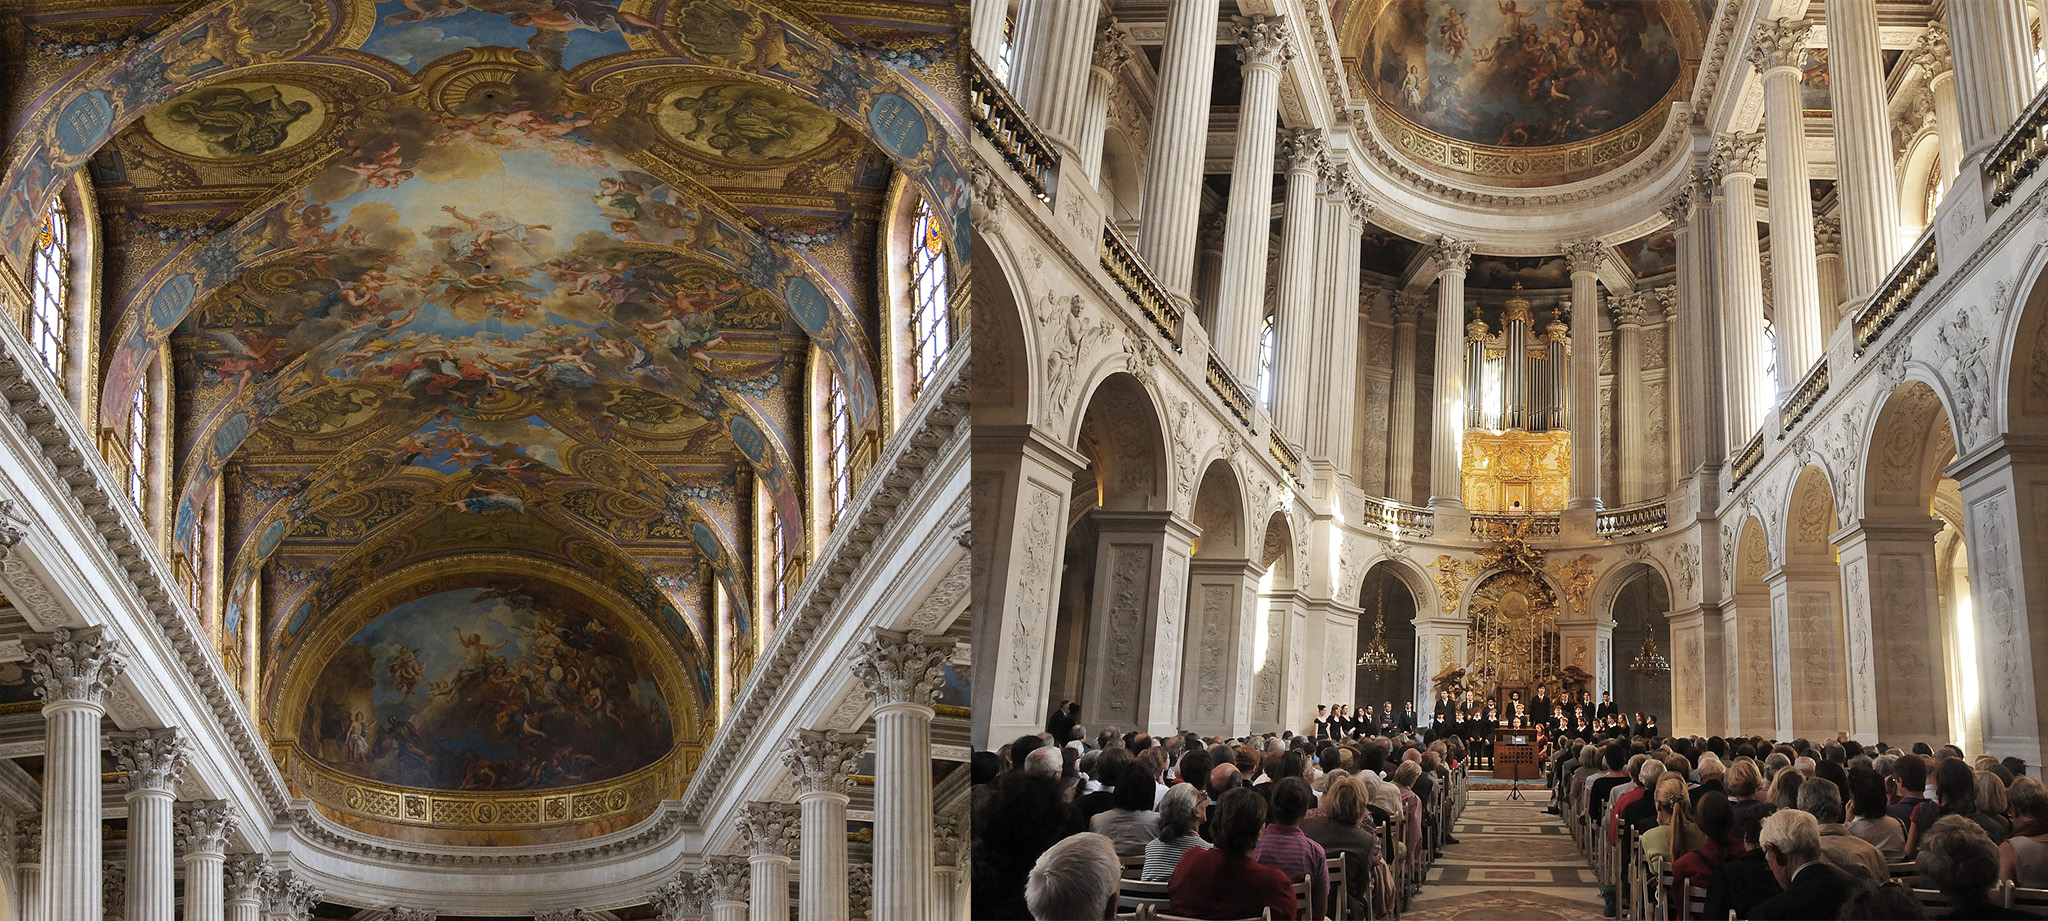 photos of events and classical concerts at the chapelle royale de versailles